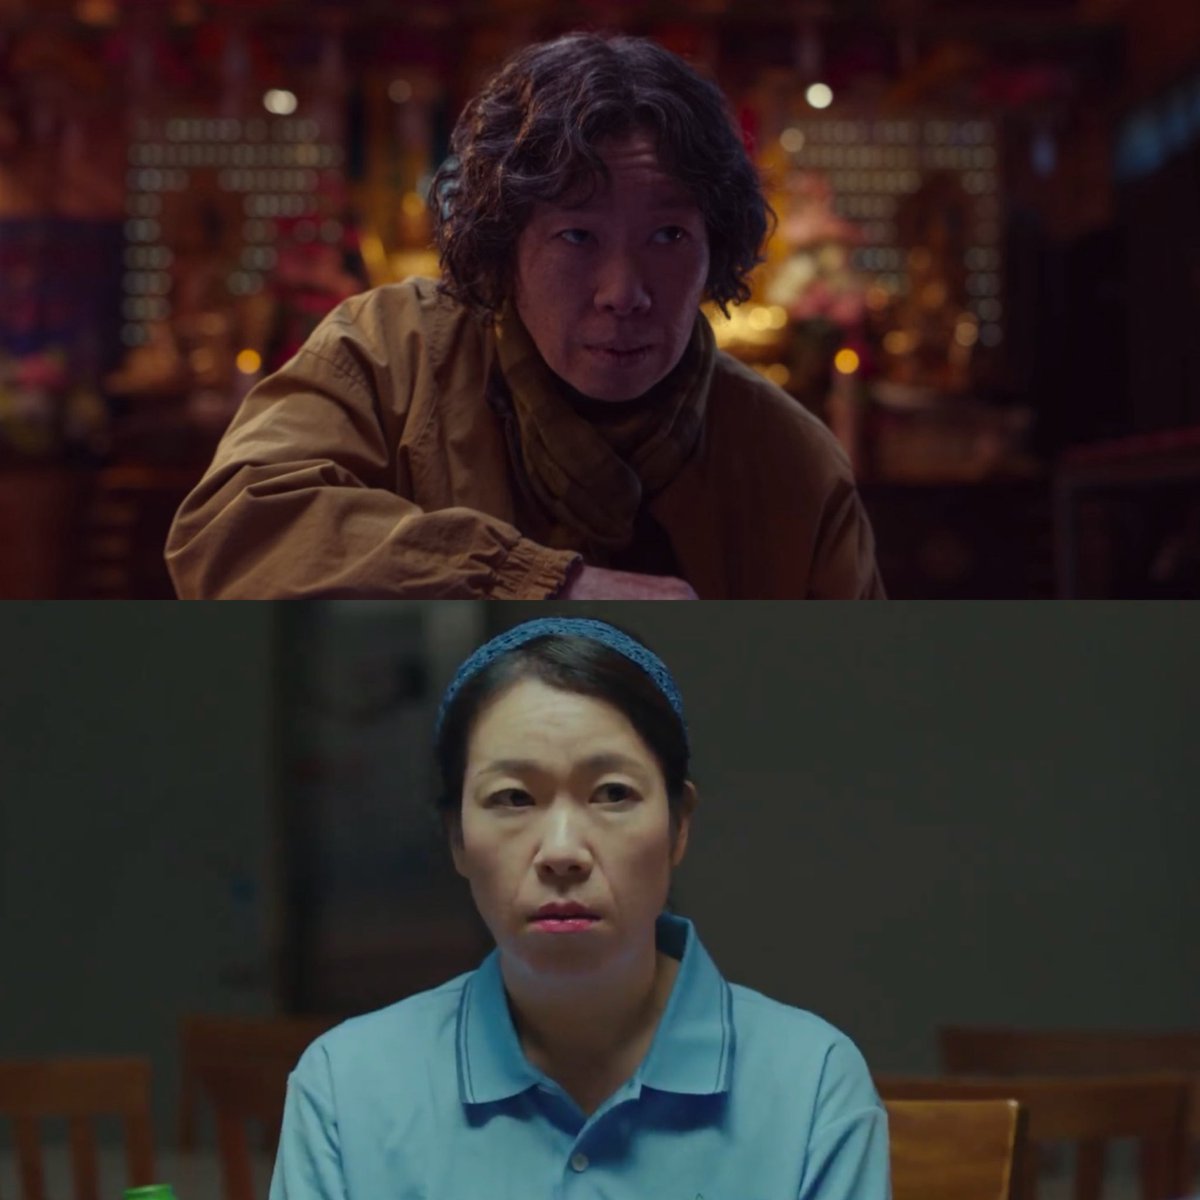 #YeomHyeRan got nominated for Baeksang in two categories & it’s for roles that are absolutely different. In #MaskGirl she had a totally different look playing a character out for revenge while her character in #CitizenOfAKind had more of a comedic touch to it. Slayed both!!